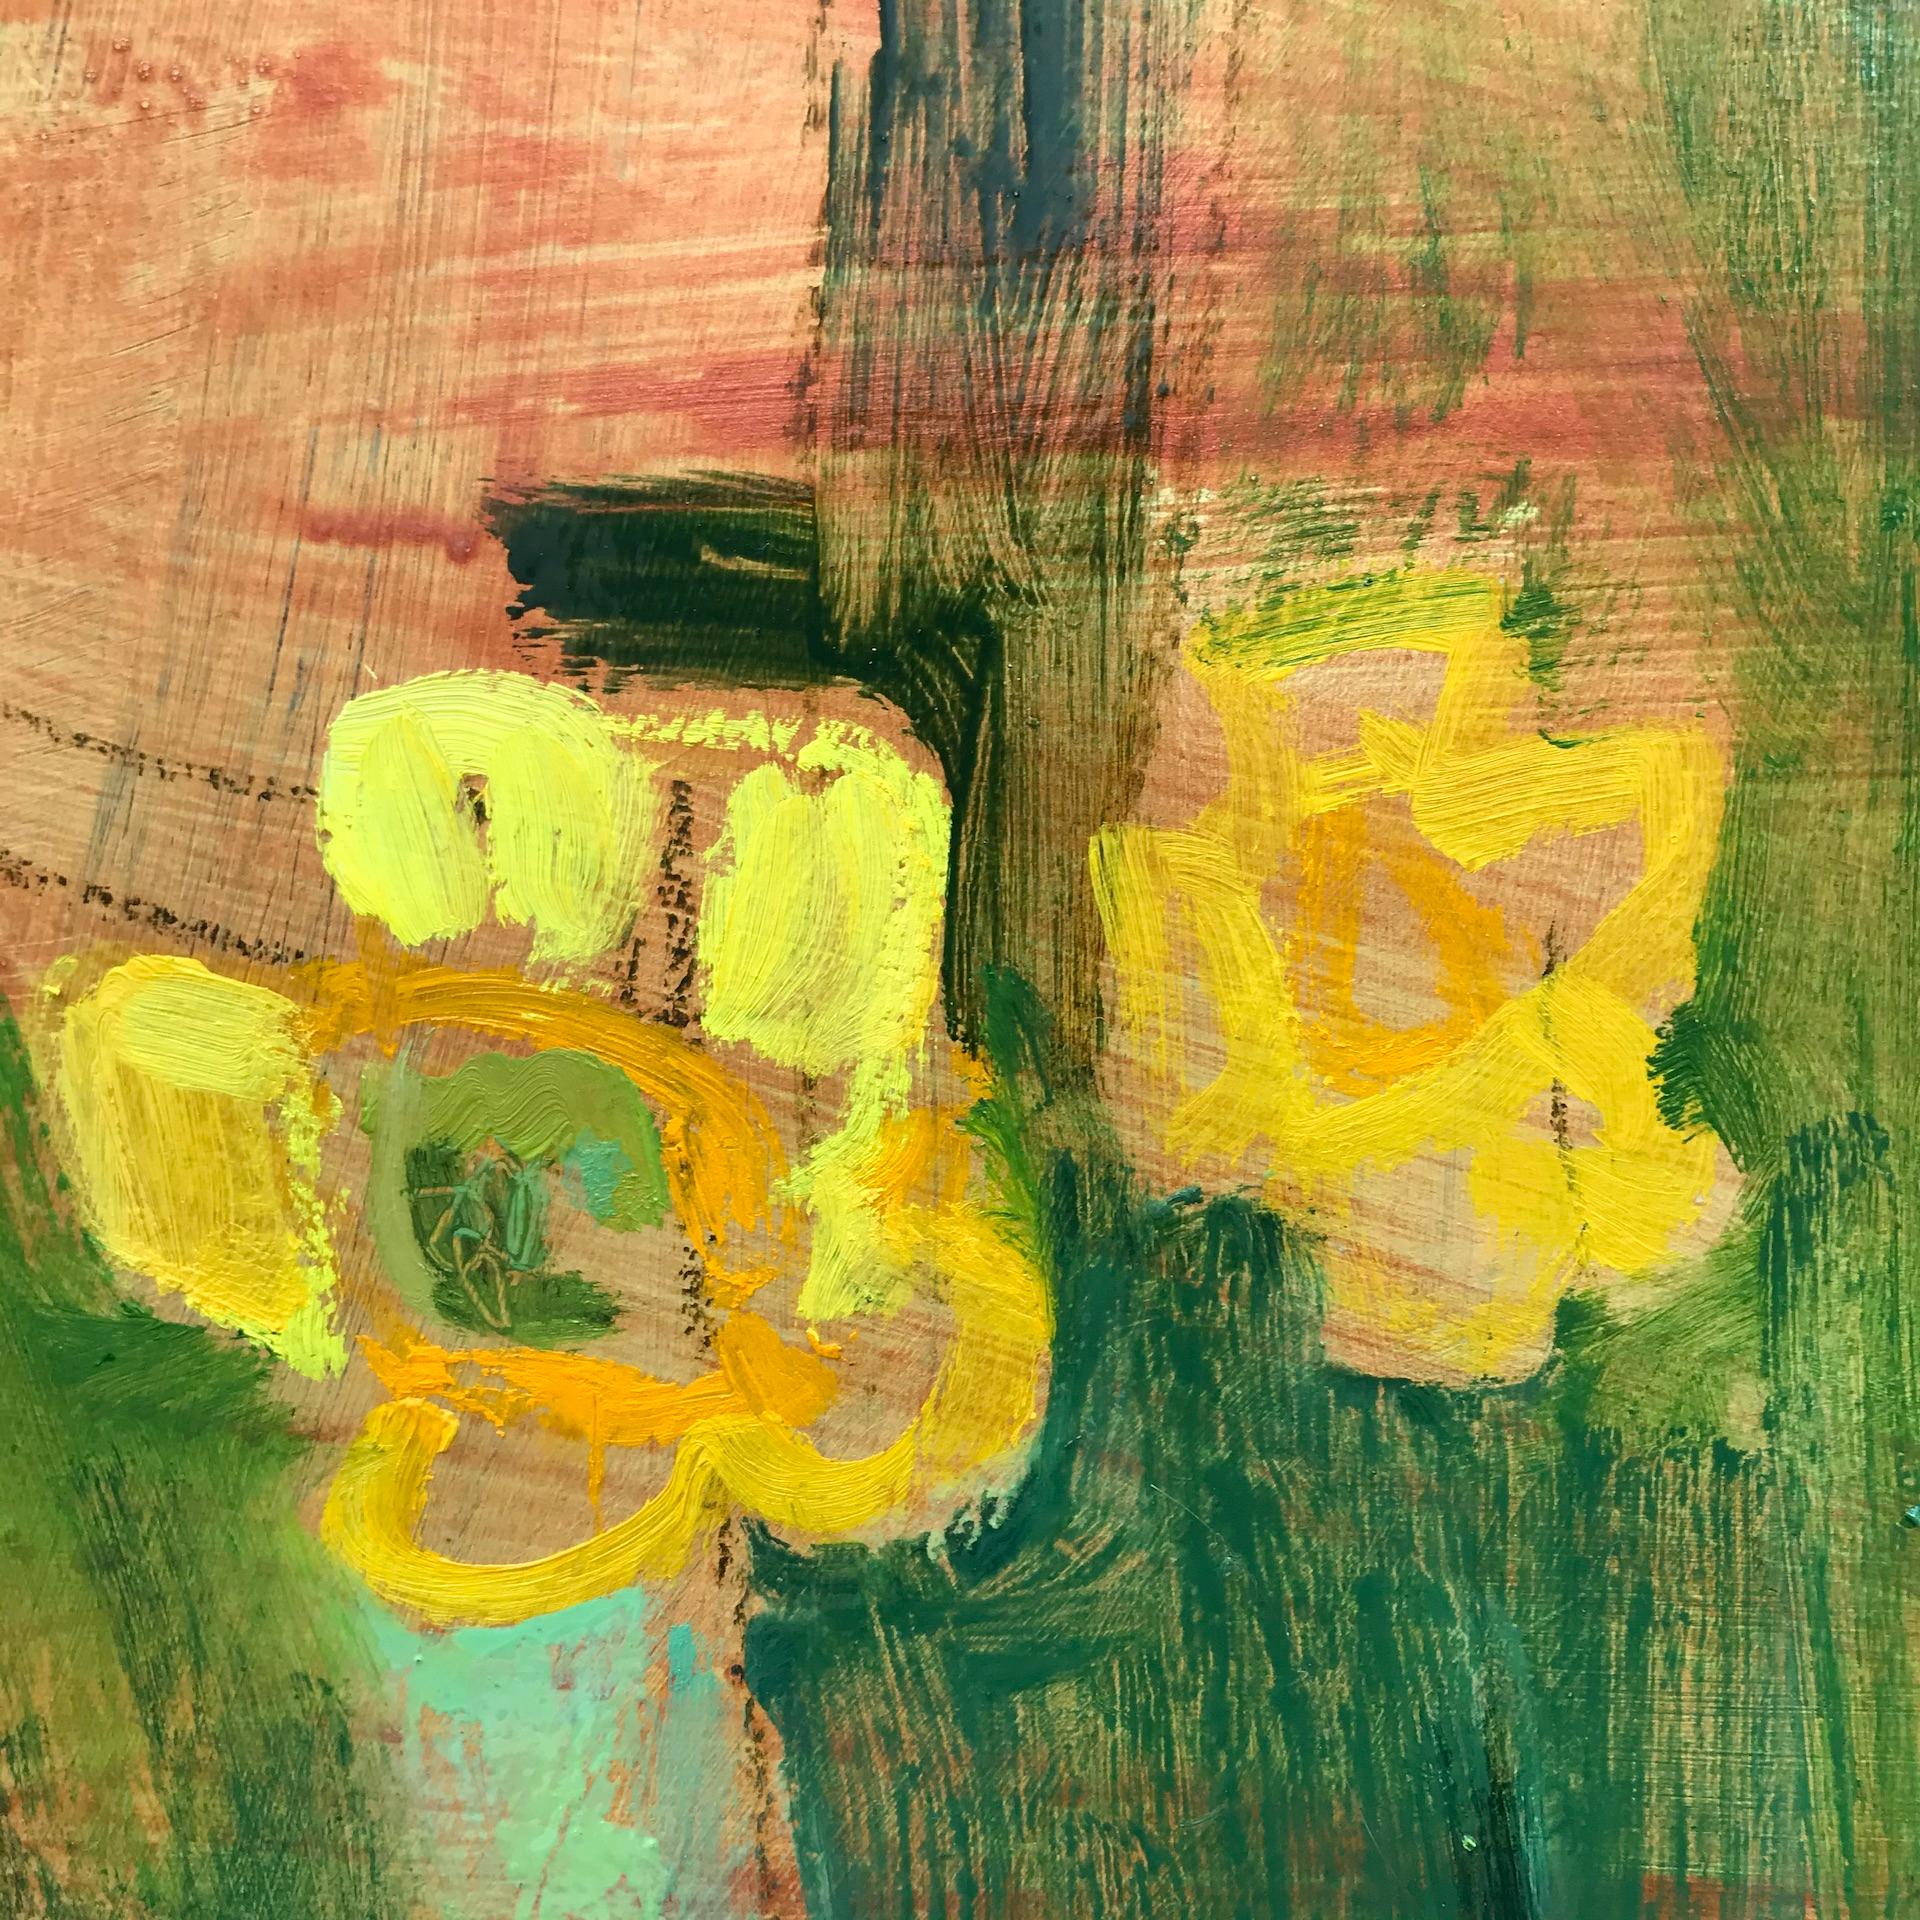 Elaine Kazimierczuk
Golden Buttercups with Gold Leaf
Original Oil Painting on Canvas
Oil Paint on Canvas
Canvas Size: H 97cm x W 97cm
Sold in a White Tray Frame.
Please note that insitu images are purely an indication of how a piece may